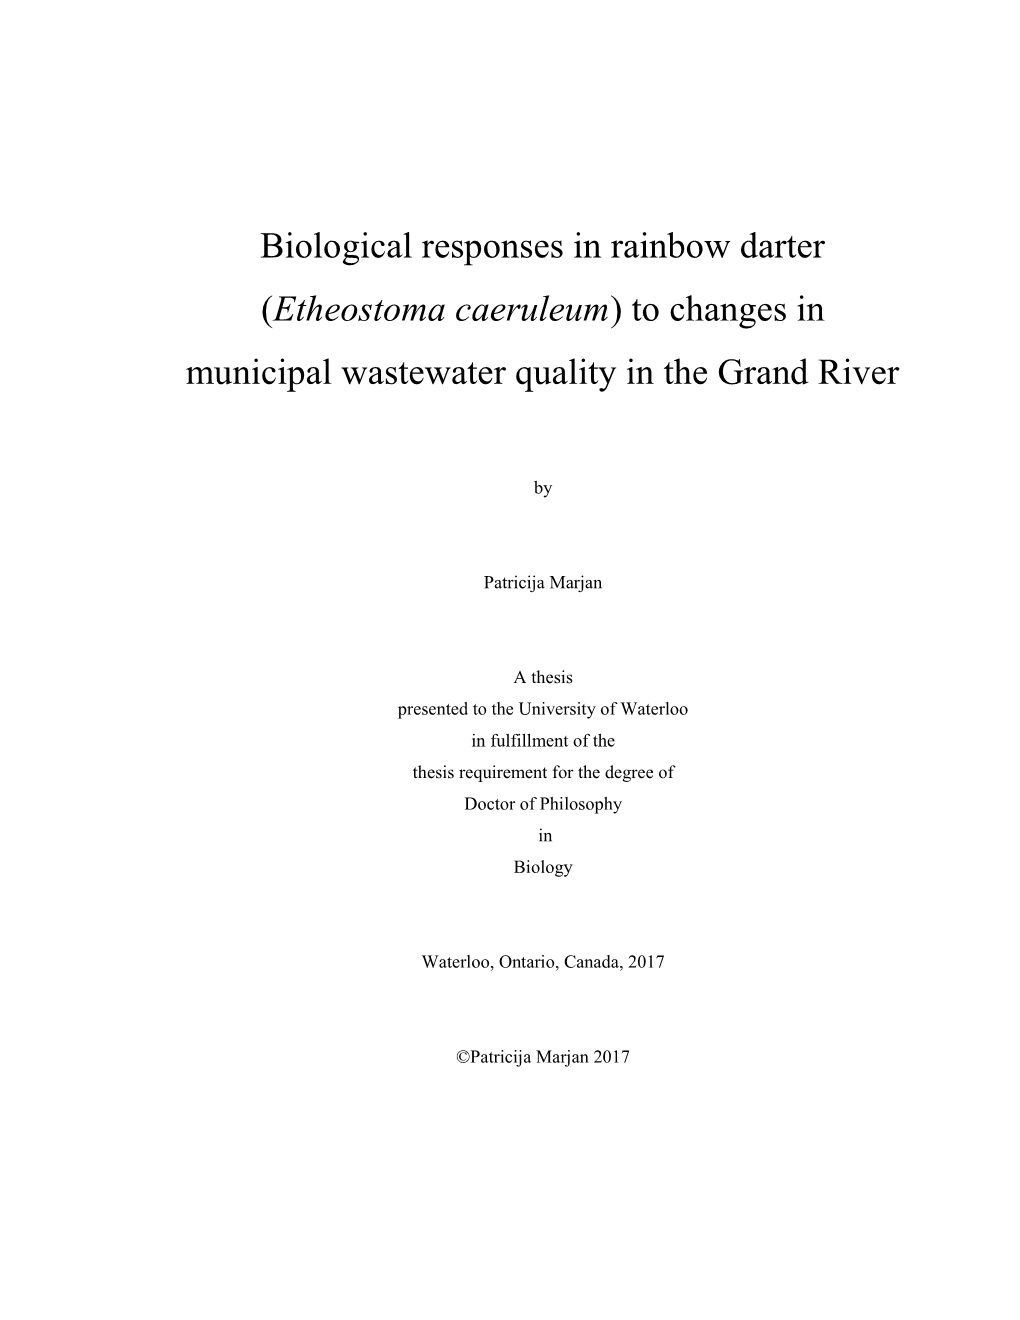 Biological Responses in Rainbow Darter (Etheostoma Caeruleum) to Changes in Municipal Wastewater Quality in the Grand River